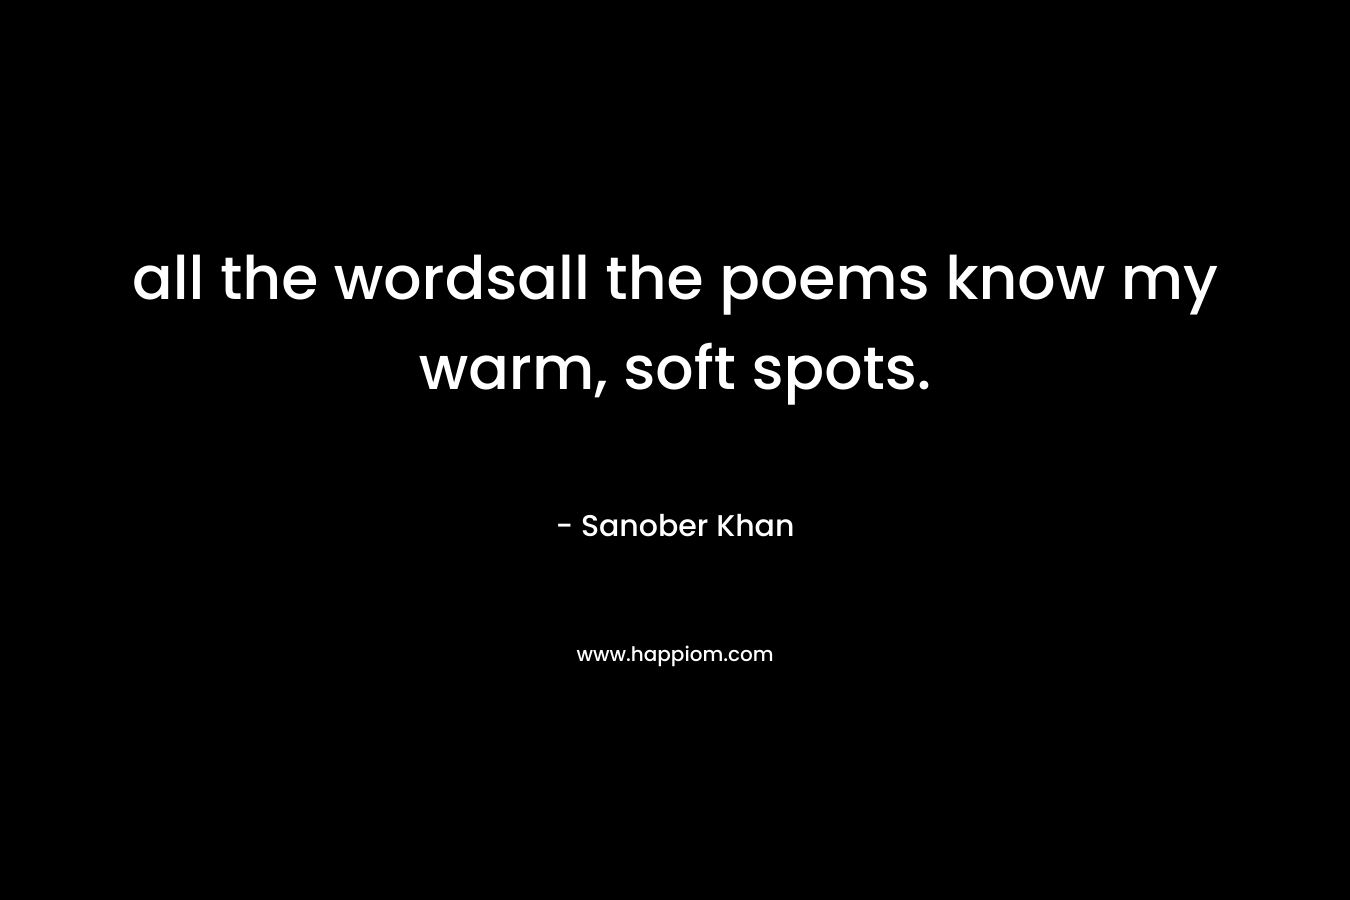 all the wordsall the poems know my warm, soft spots.